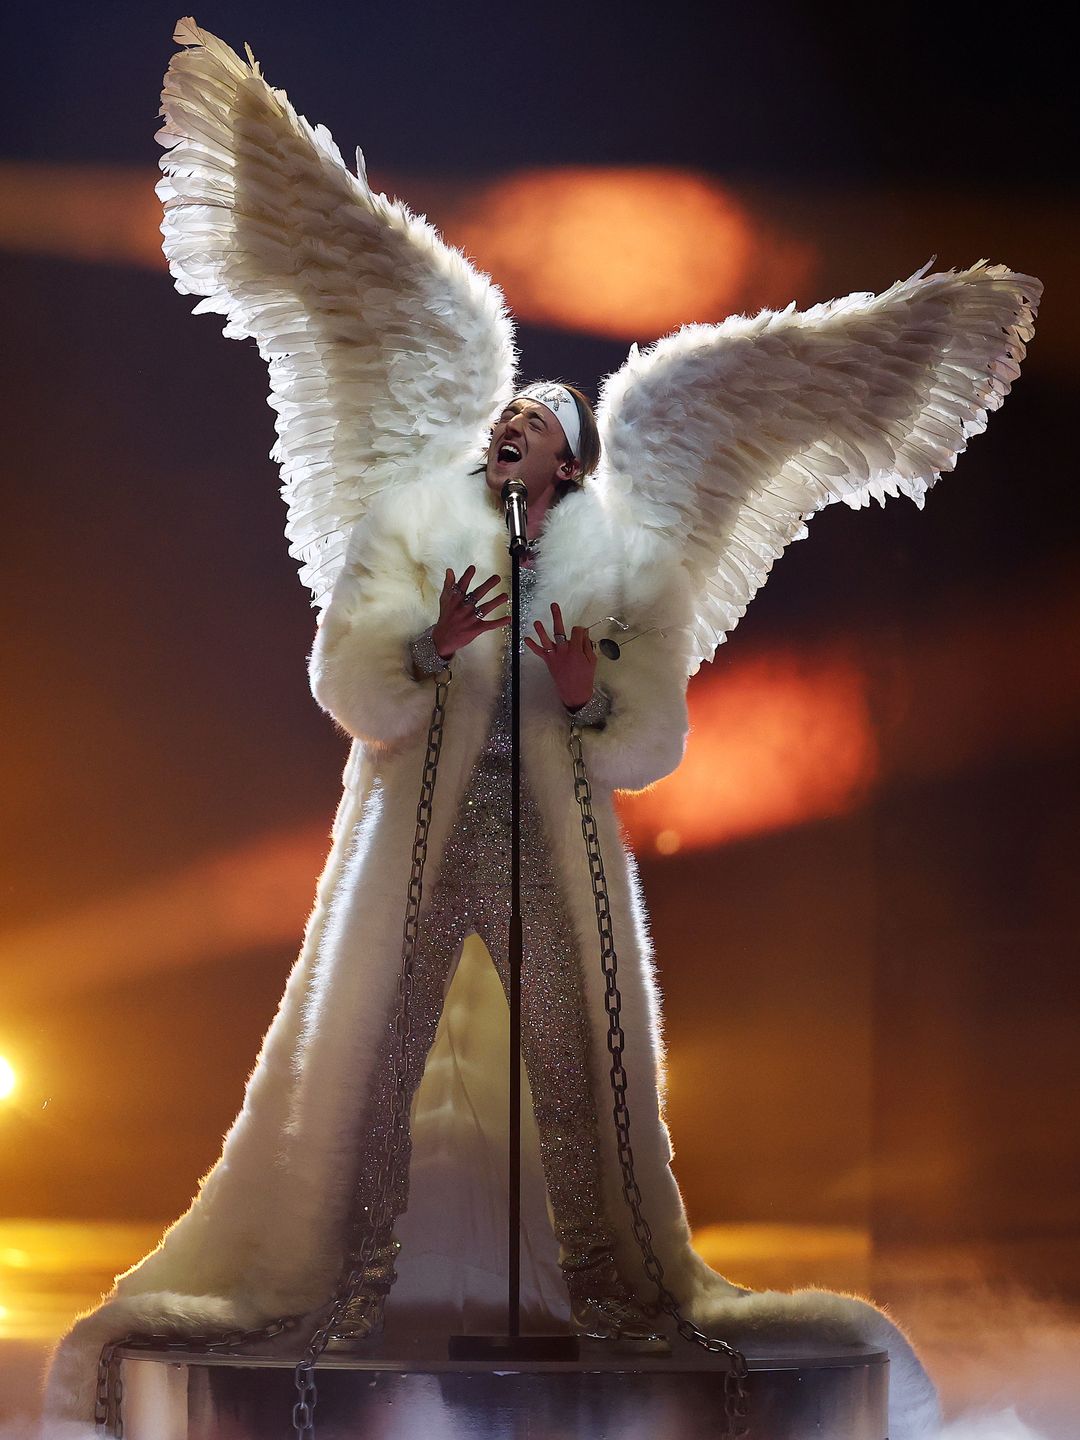 'TIX' of Norway wearing angel wings during the 65th Eurovision Song Contest dress rehearsal held at Rotterdam Ahoy on May 21, 2021